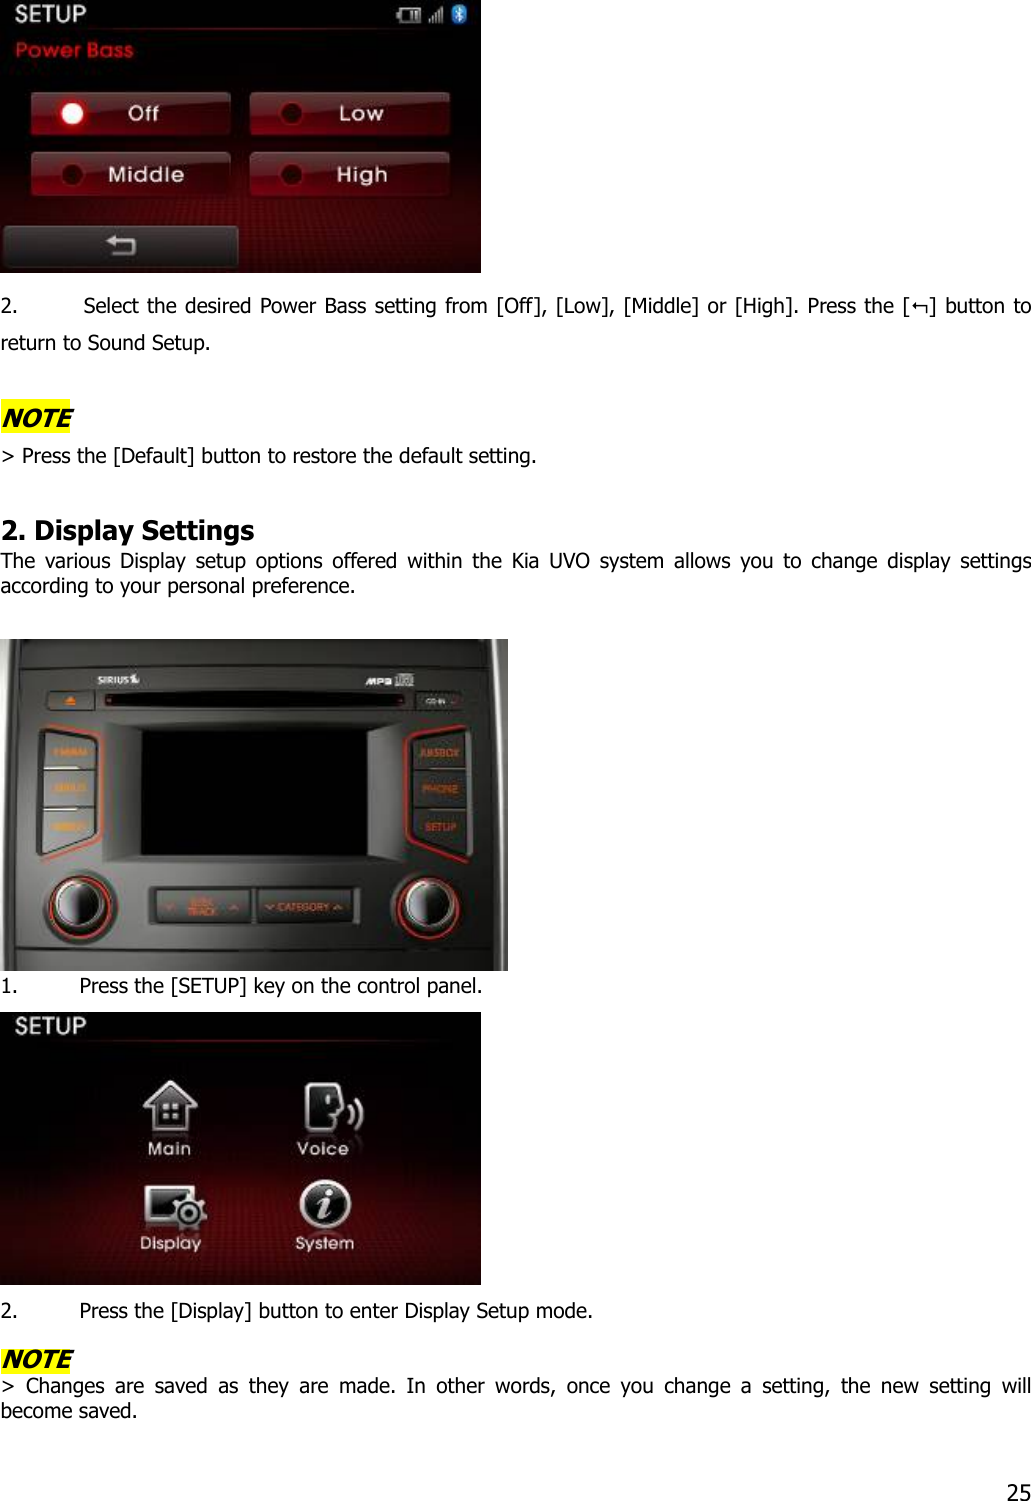  2. Select the desired Power Bass setting from [Off], [Low], [Middle] or [High]. Press the [] button to return to Sound Setup.  NOTE &gt; Press the [Default] button to restore the default setting.  2. Display Settings The various Display setup options offered within the Kia UVO system allows you to change display settings according to your personal preference.     1. Press the [SETUP] key on the control panel.    2. Press the [Display] button to enter Display Setup mode.    NOTE &gt; Changes are saved as they are made. In other words, once you change a setting, the new setting will become saved.   25